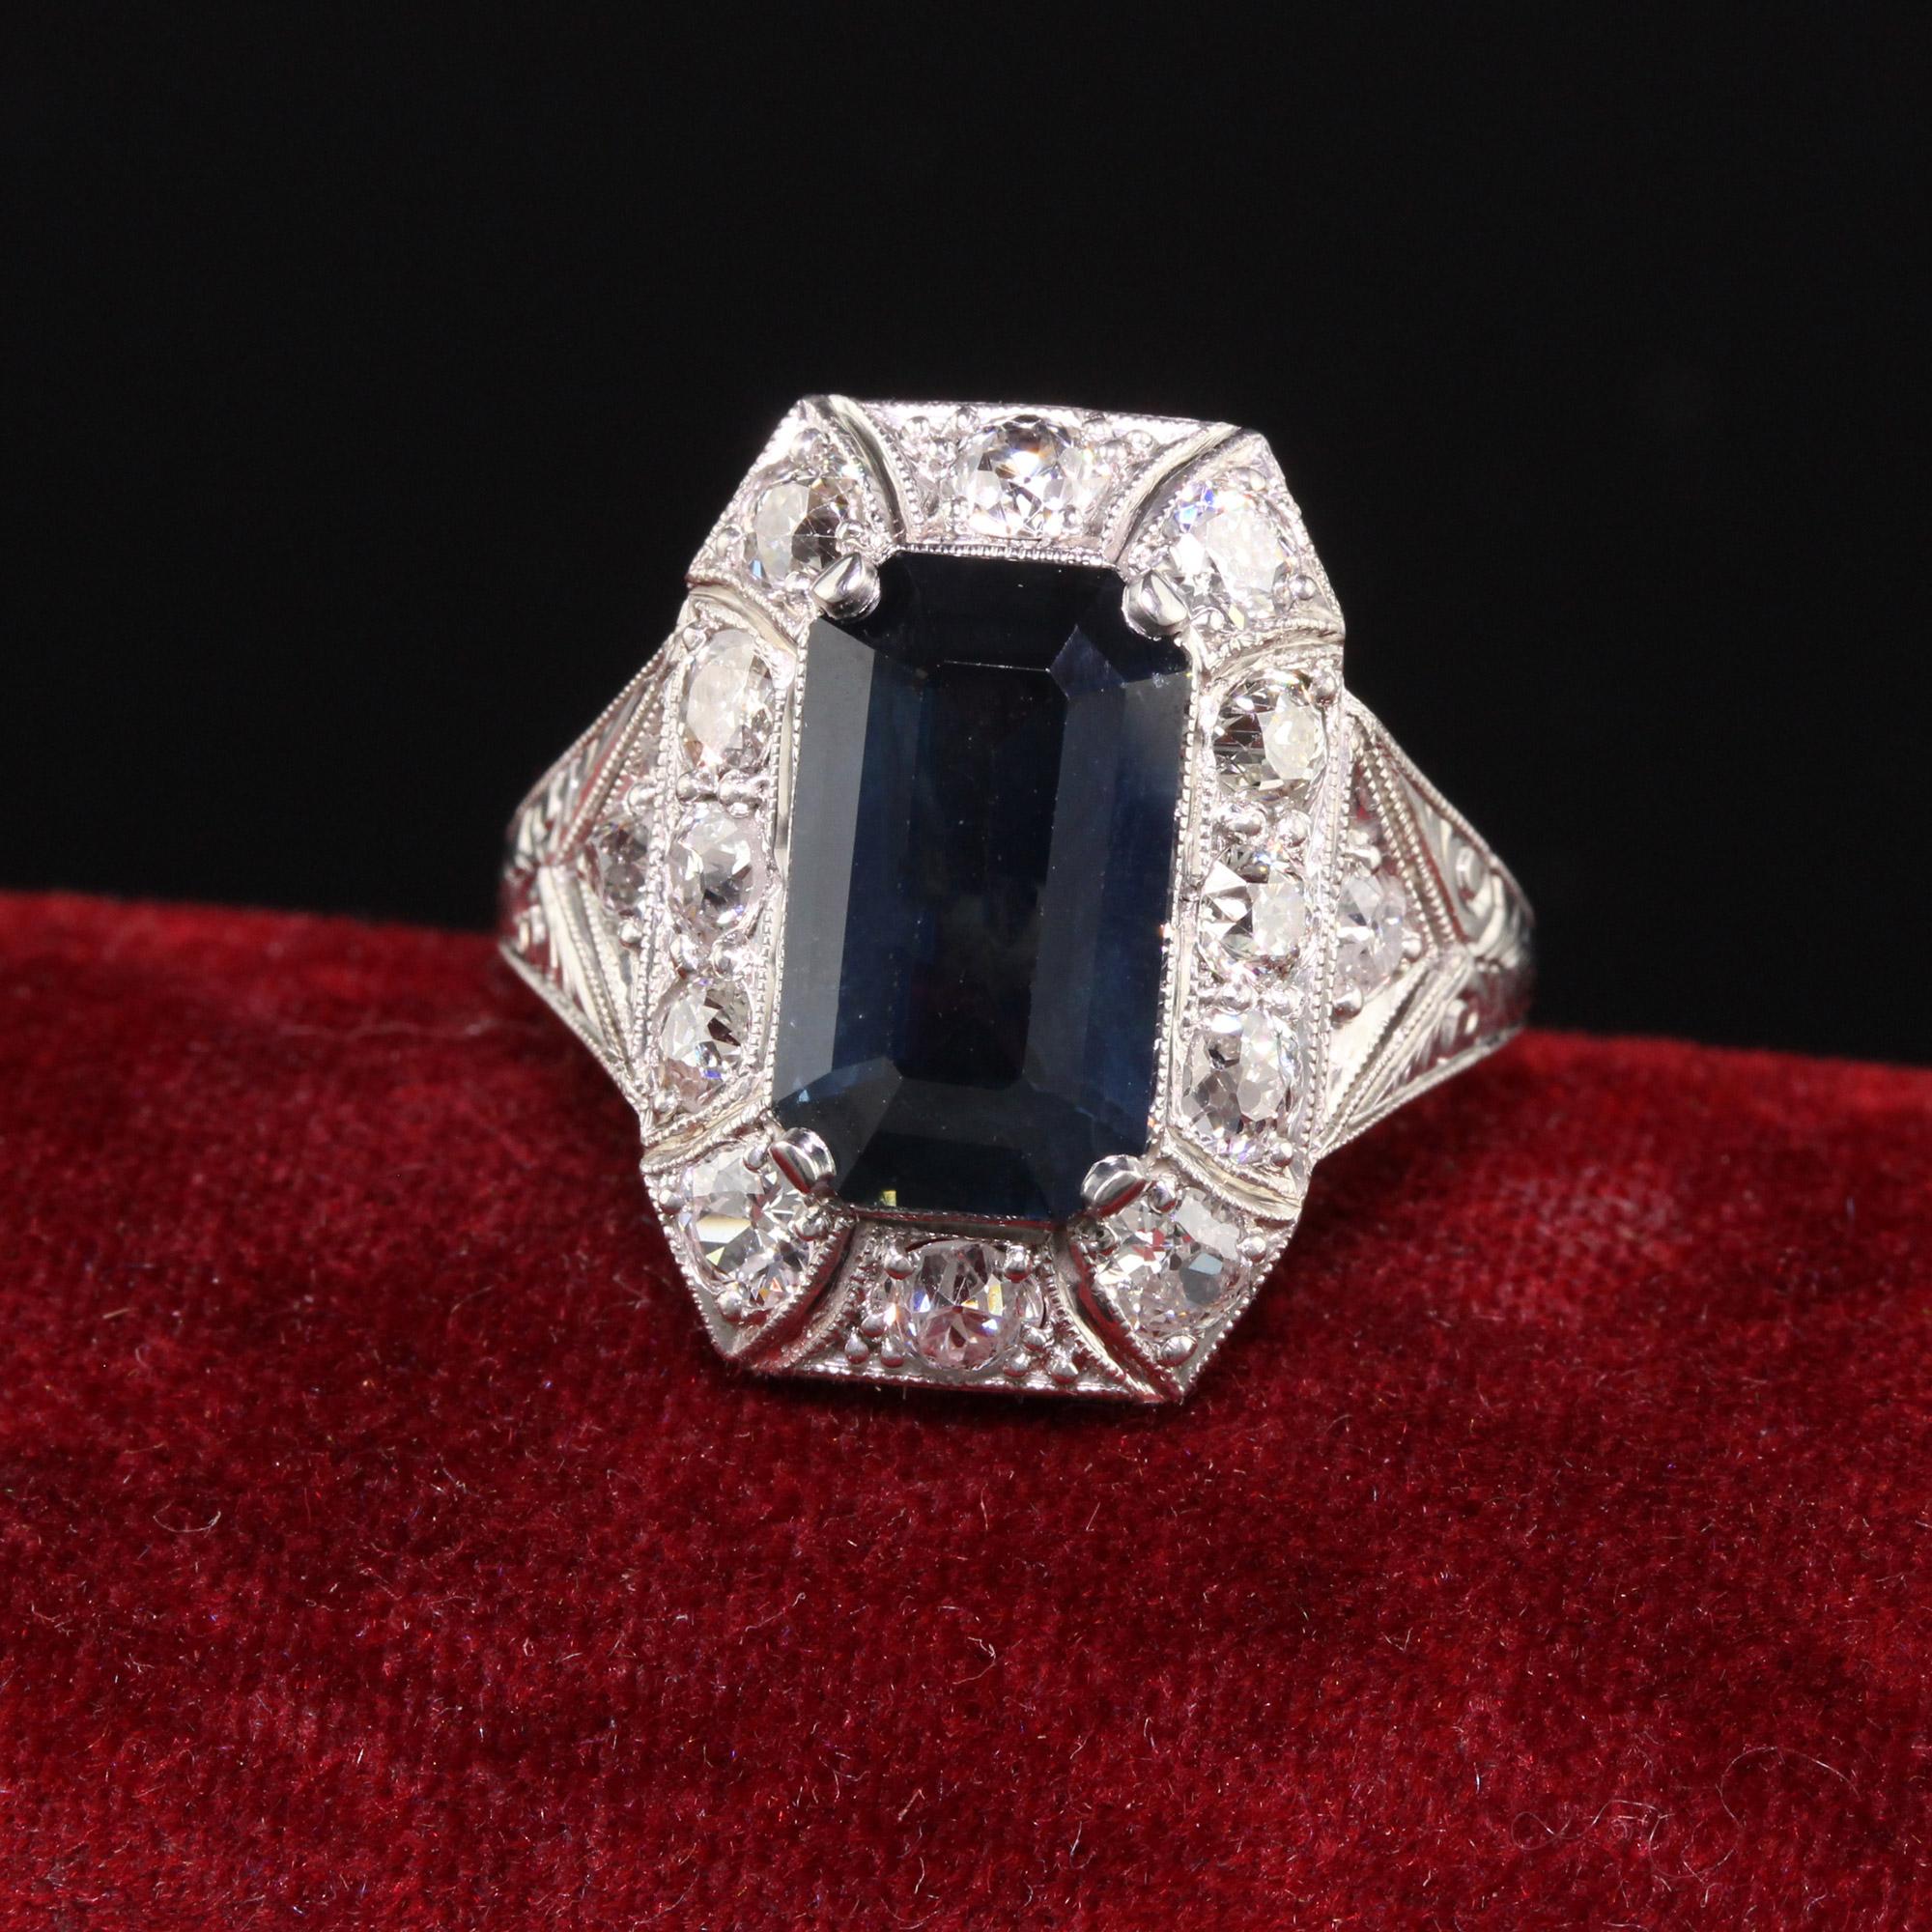 Beautiful Antique Art Deco Platinum Sapphire and Old European Diamond Cocktail Ring. This beautiful cocktail ring is crafted in platinum. The center holds a natural emerald cut sapphire and is surrounded by old european cut diamonds. The ring has